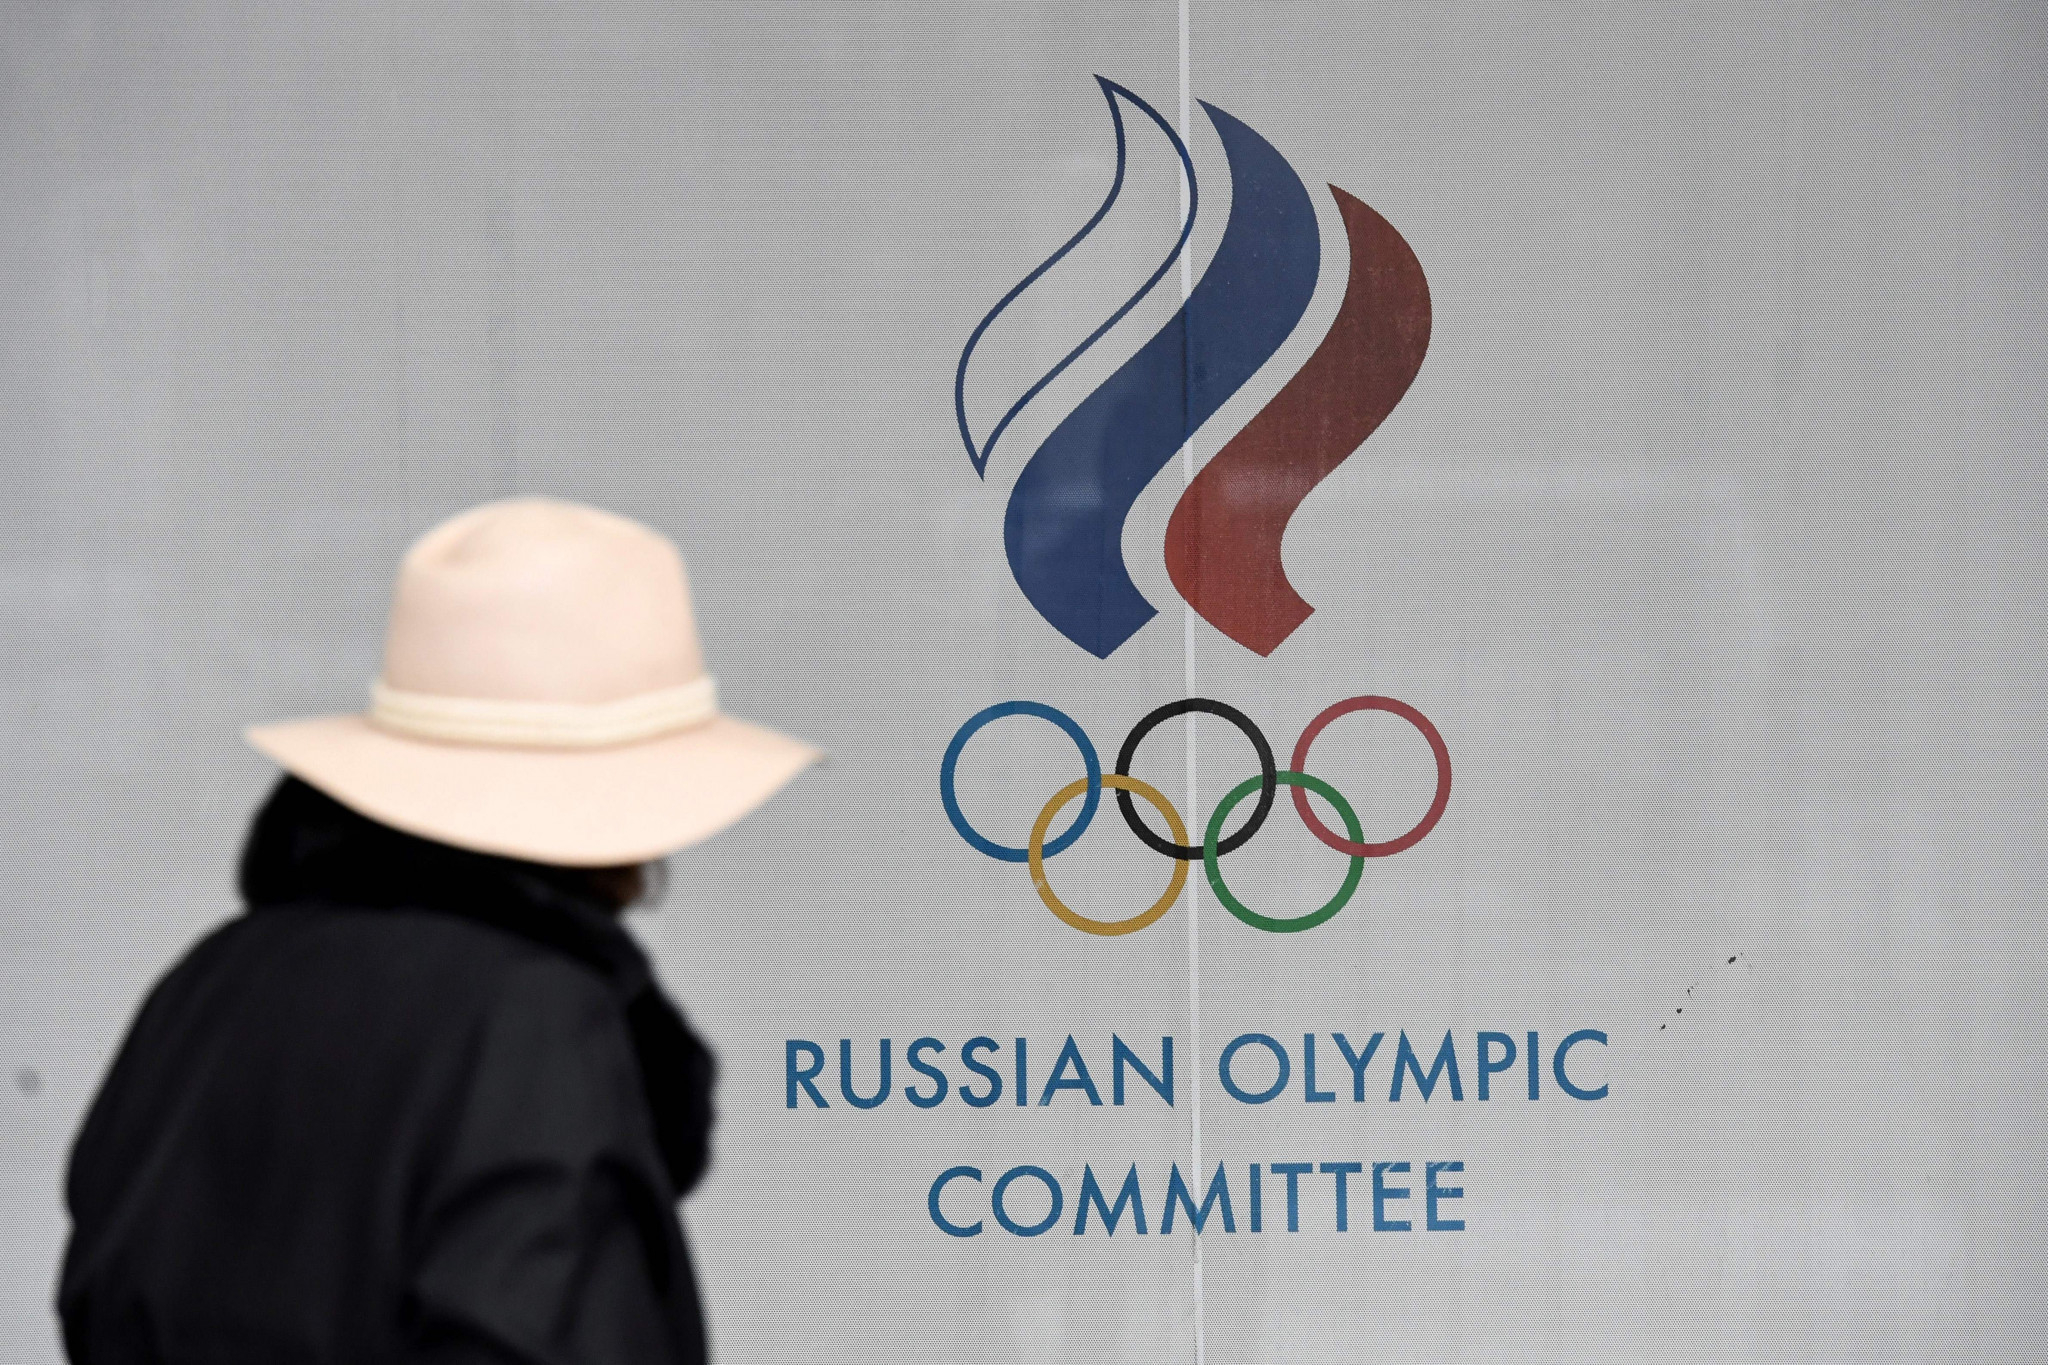 Russia Pays Over $2M to athletes missing Olympics